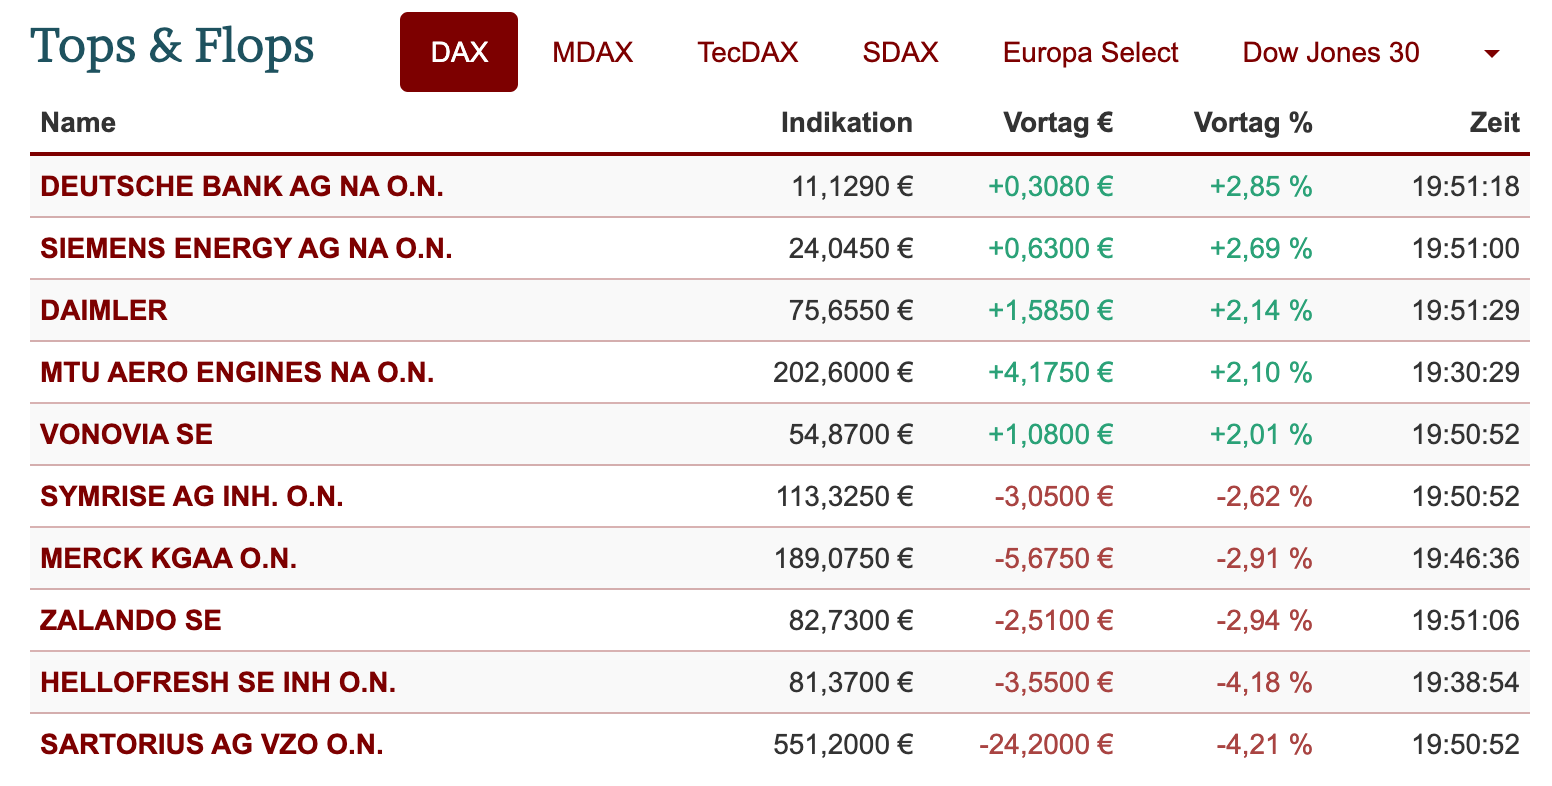 2021-09-27-dax-topflop.png